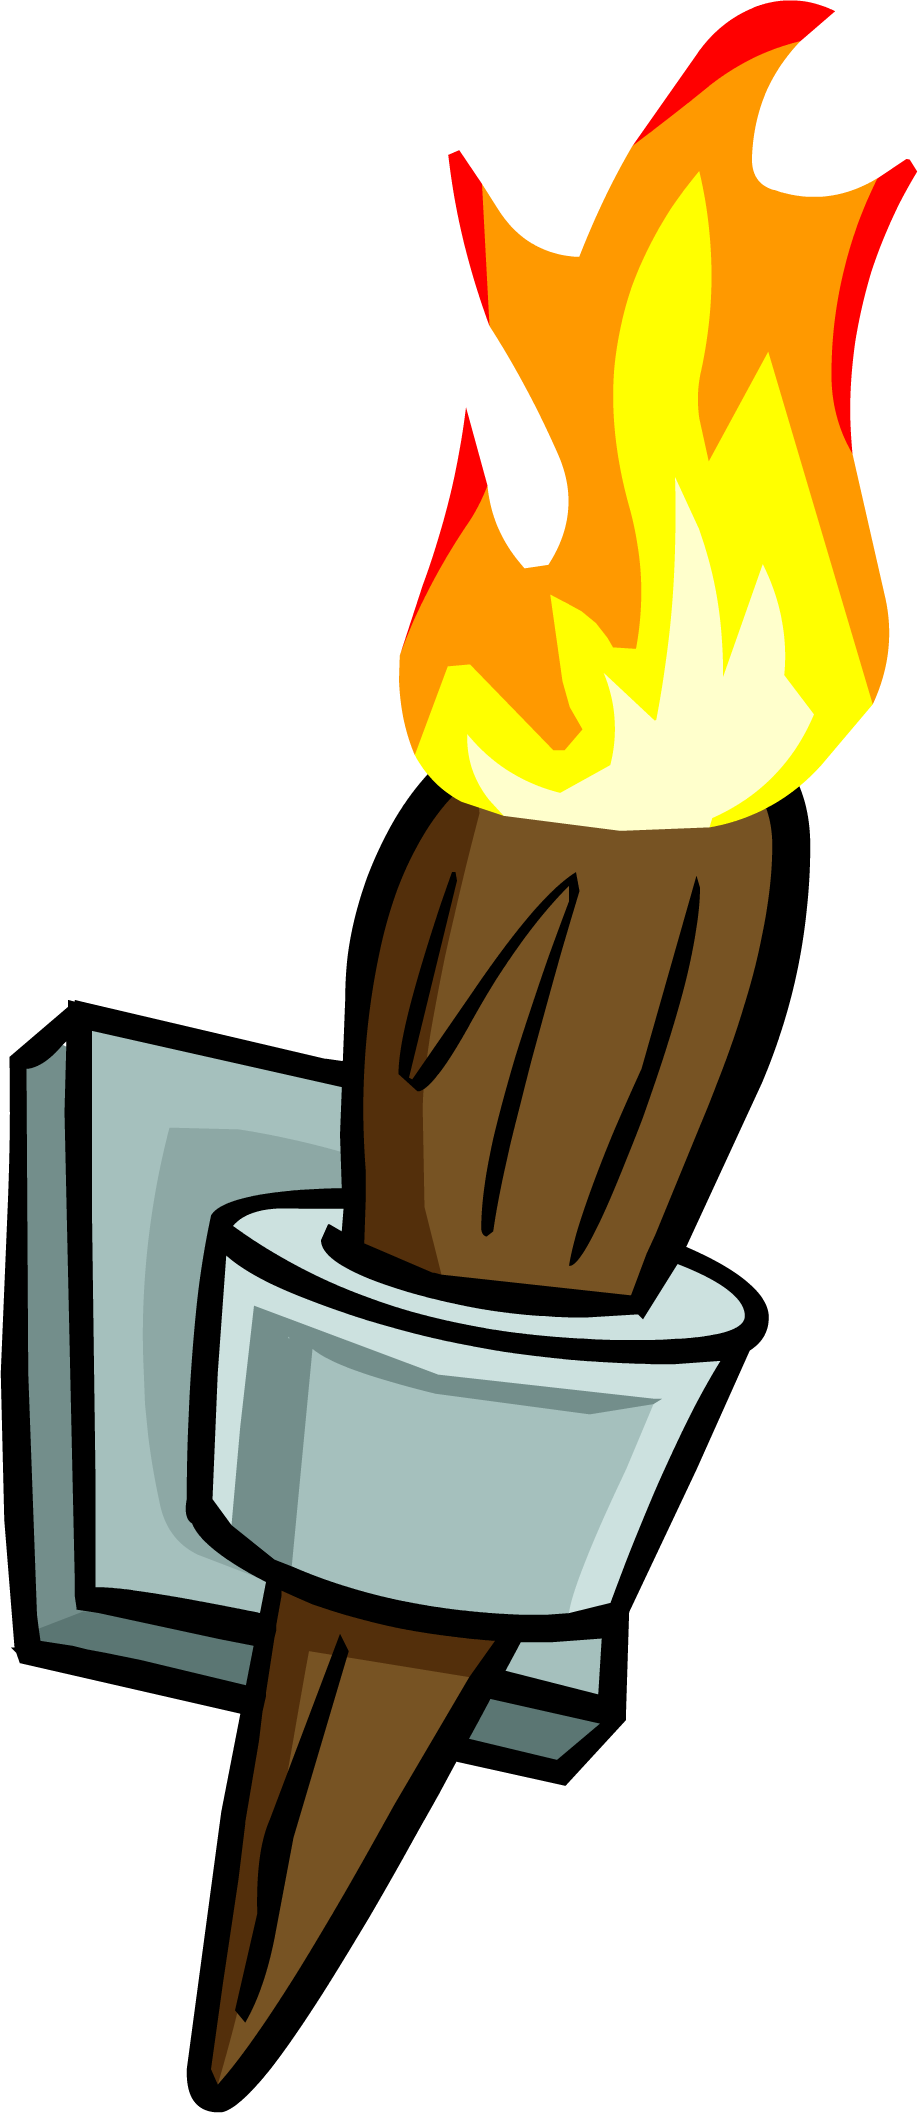 Wall Torch - Png - Club Penguin Torch (918x2113)